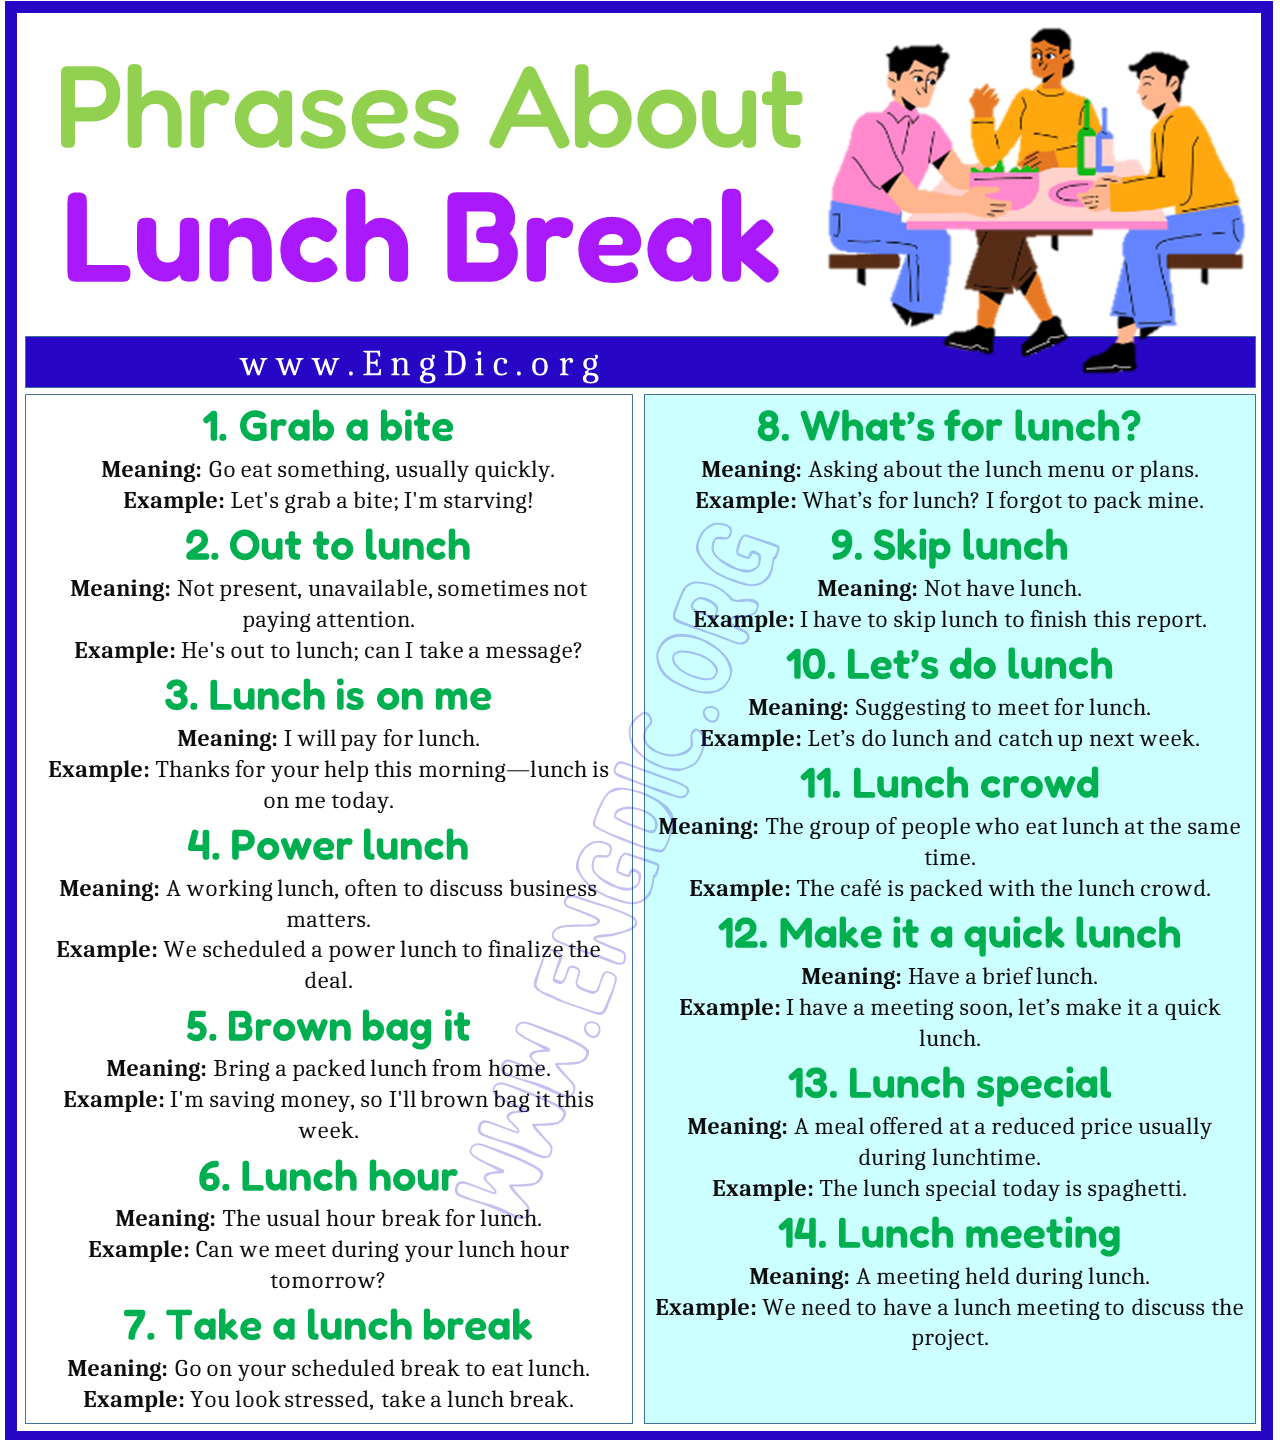 Phrases about Lunch Break